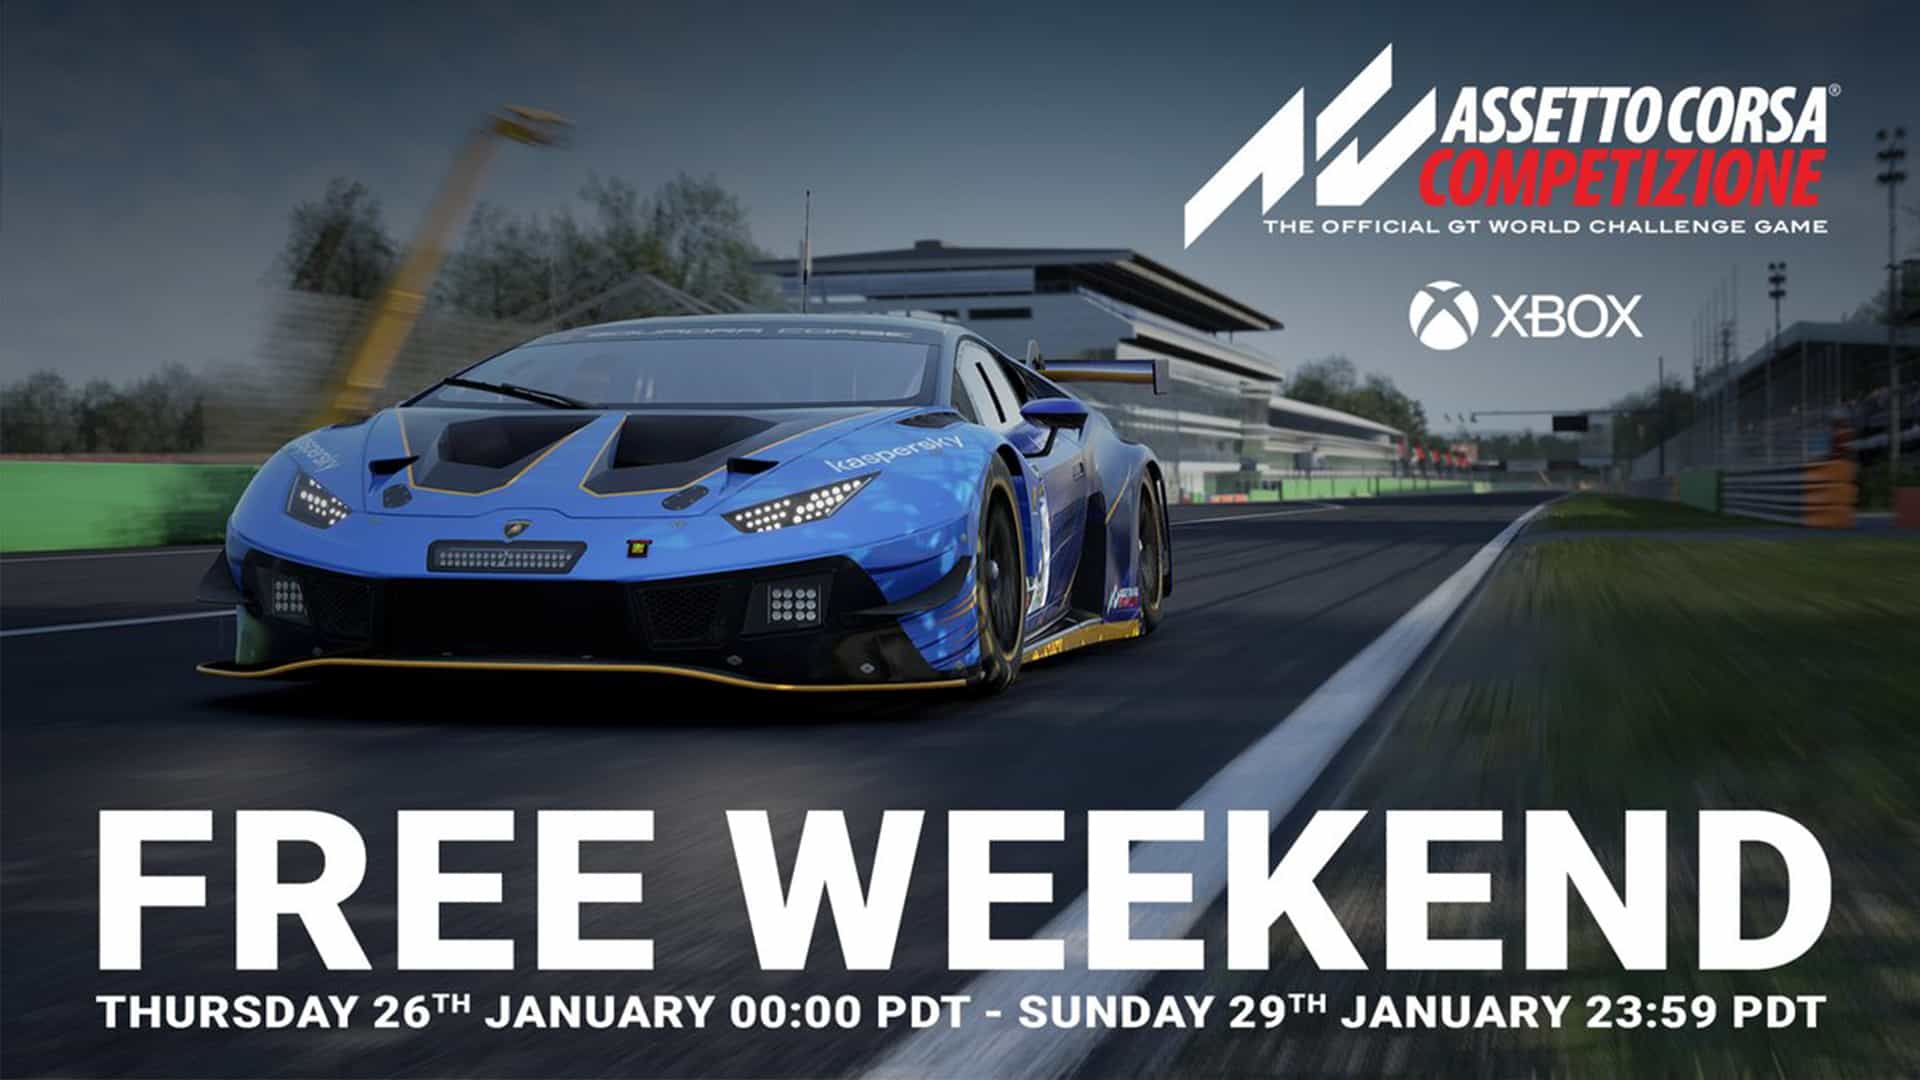 applaus Leerling Haringen Assetto Corsa Competizione is free-to-play on Xbox this weekend | Traxion